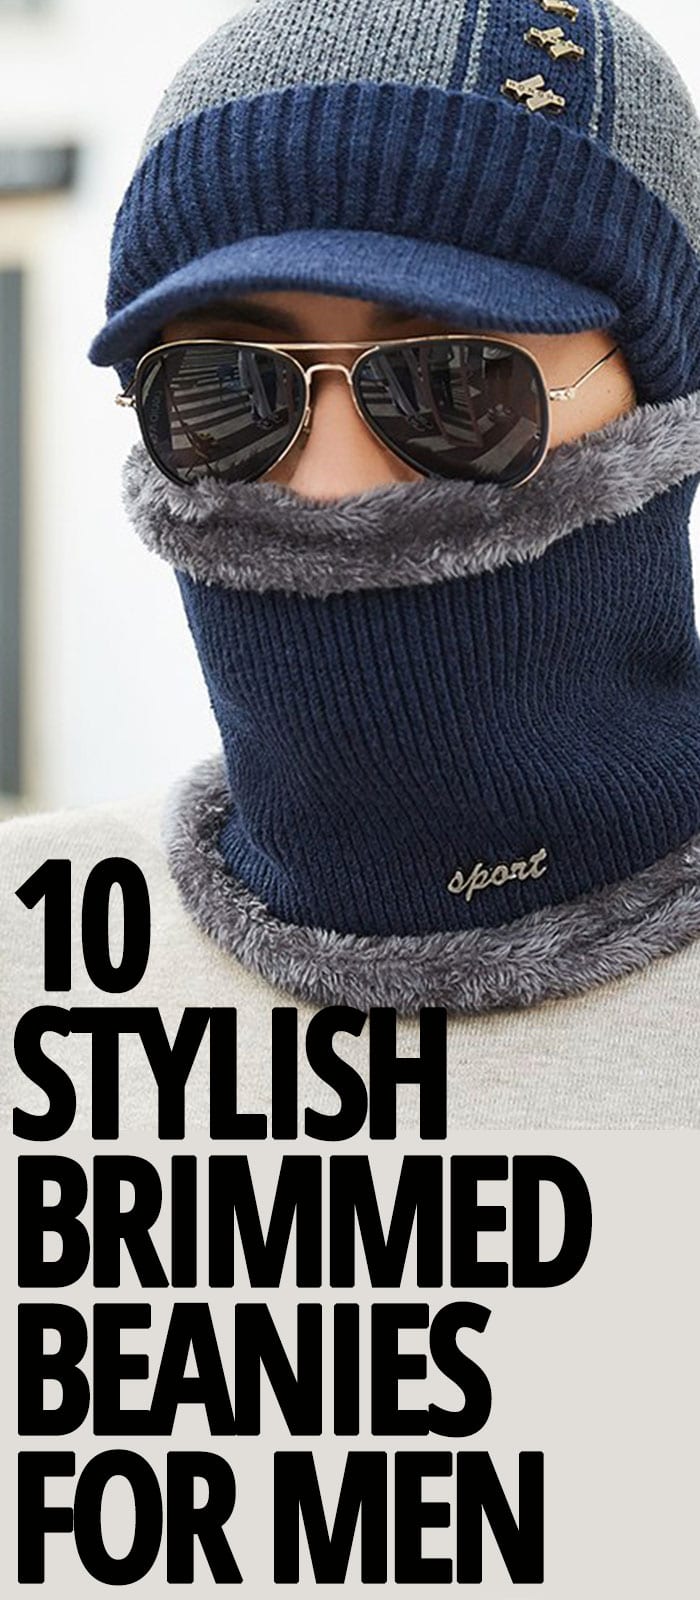 STYLISH BRIMMED BEANIES FOR MEN